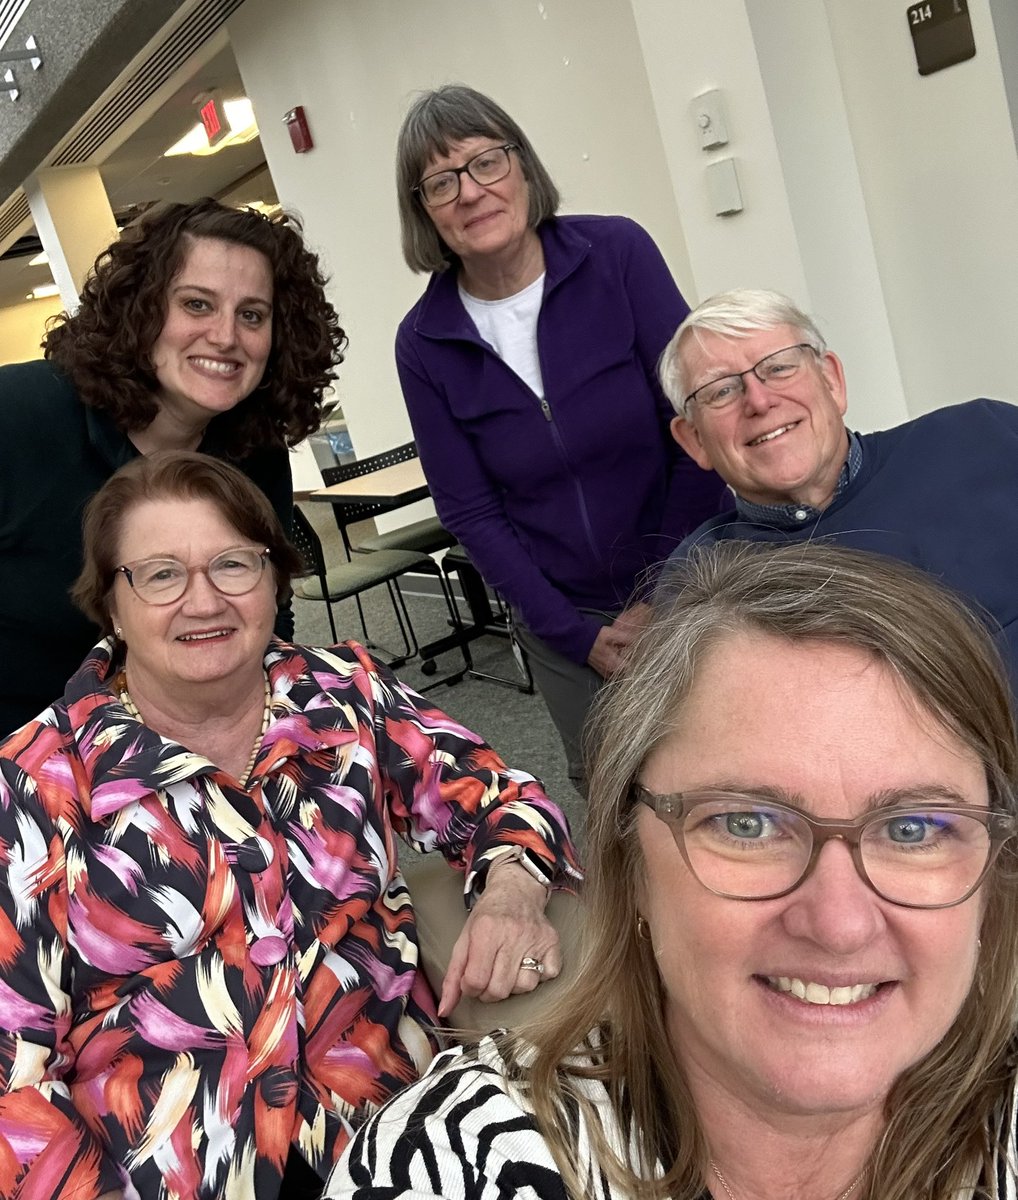 25 years after first considering the #REGARDSStudy! Here we are - me & our key @UVMLarnerMed senior staff Elaine Cornell & Rebekah Boyle - with the Howards from @uabsoph! Of course, without our many staff at both institutions, REGARDS could not happen! Great visit!